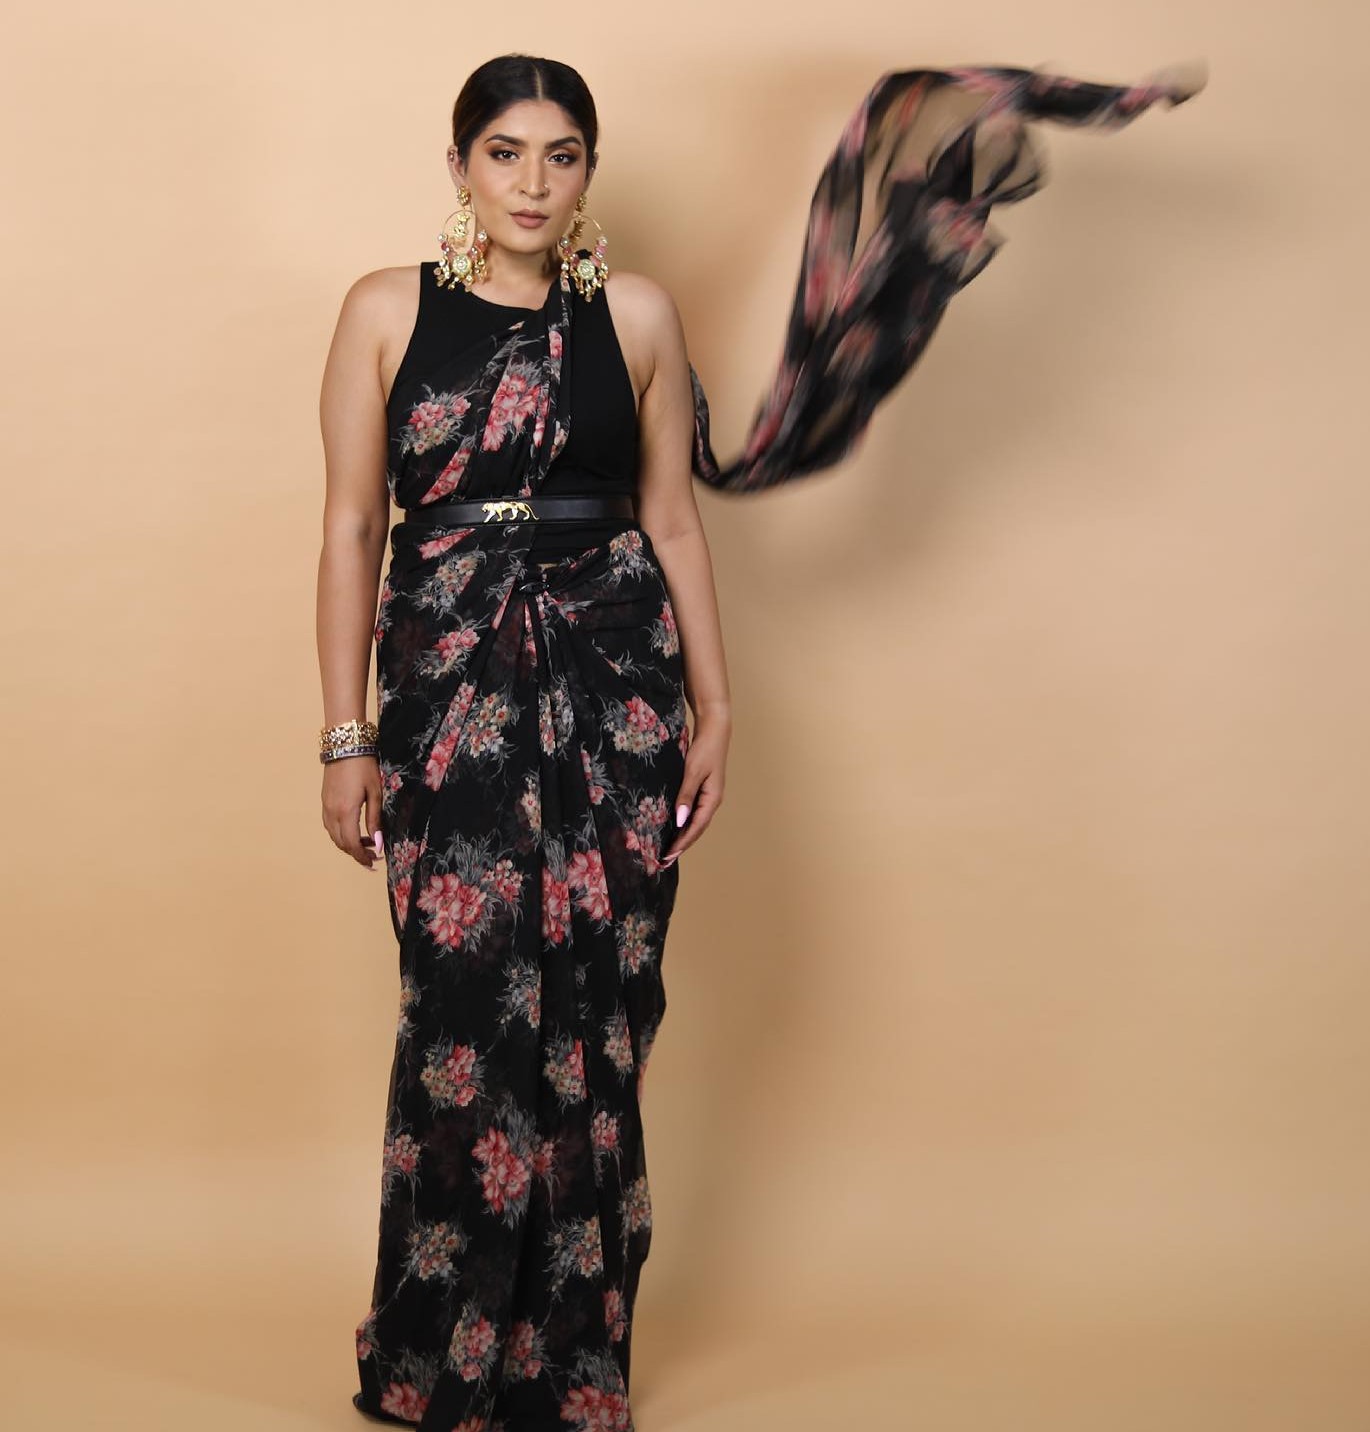 Shreya Jain Slaying THe Saree Look In Black Floral Printed Saree Styled With Sabyasachi Authentic Waist Belt Exclusive Outfits & Looks